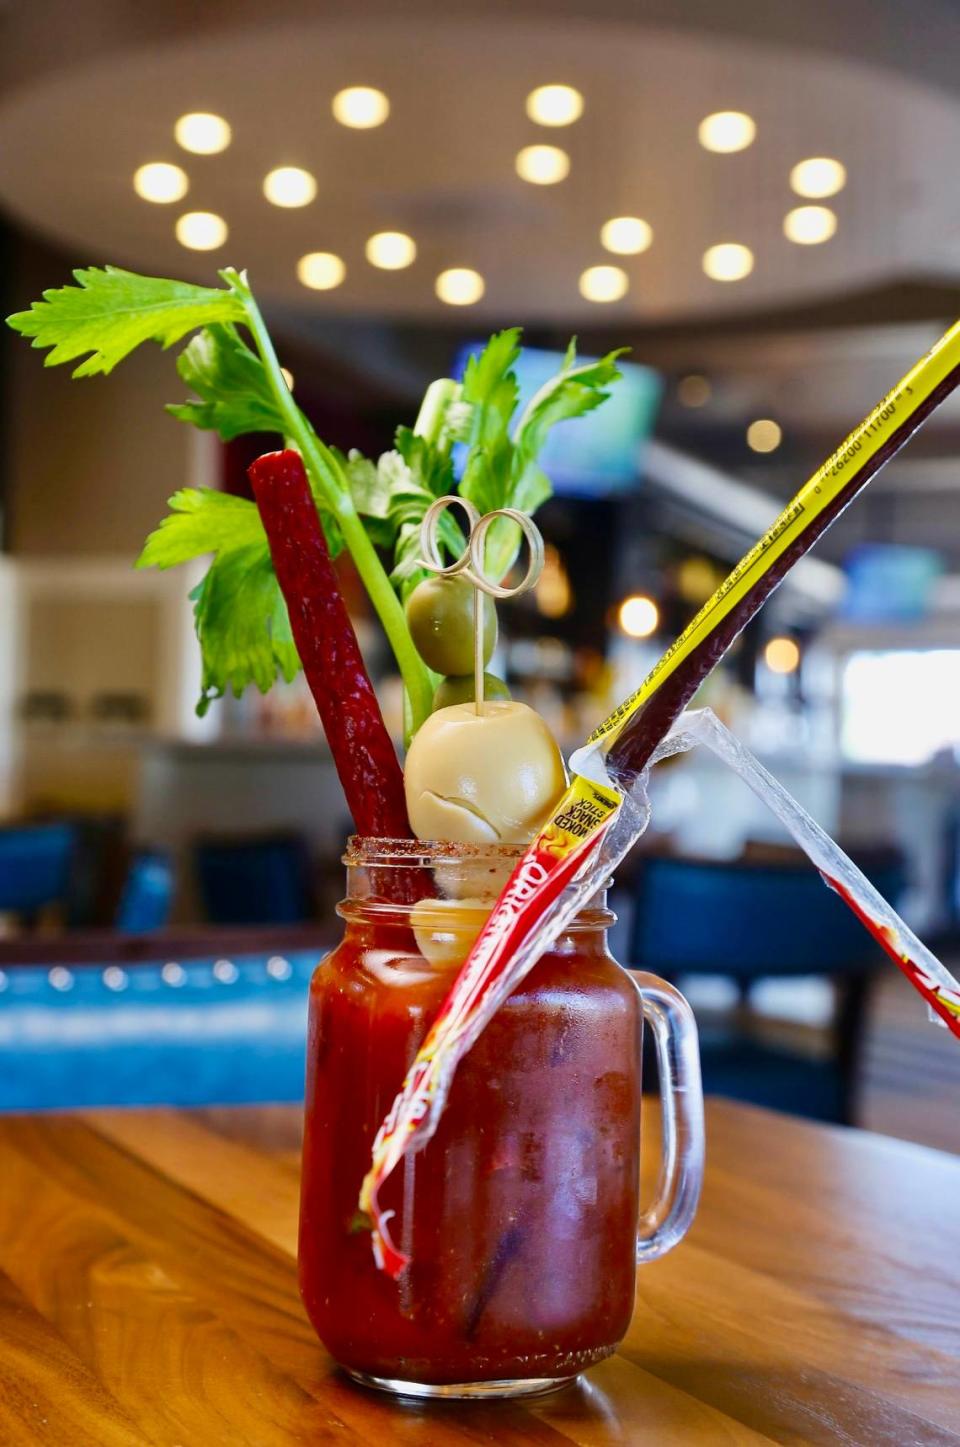 Hash Kitchen in Fort Worth, a Phoenix-based “boozy brunch” restaurant, offers a “build your own” bloody mary bar, shown Feb. 21, 2019.